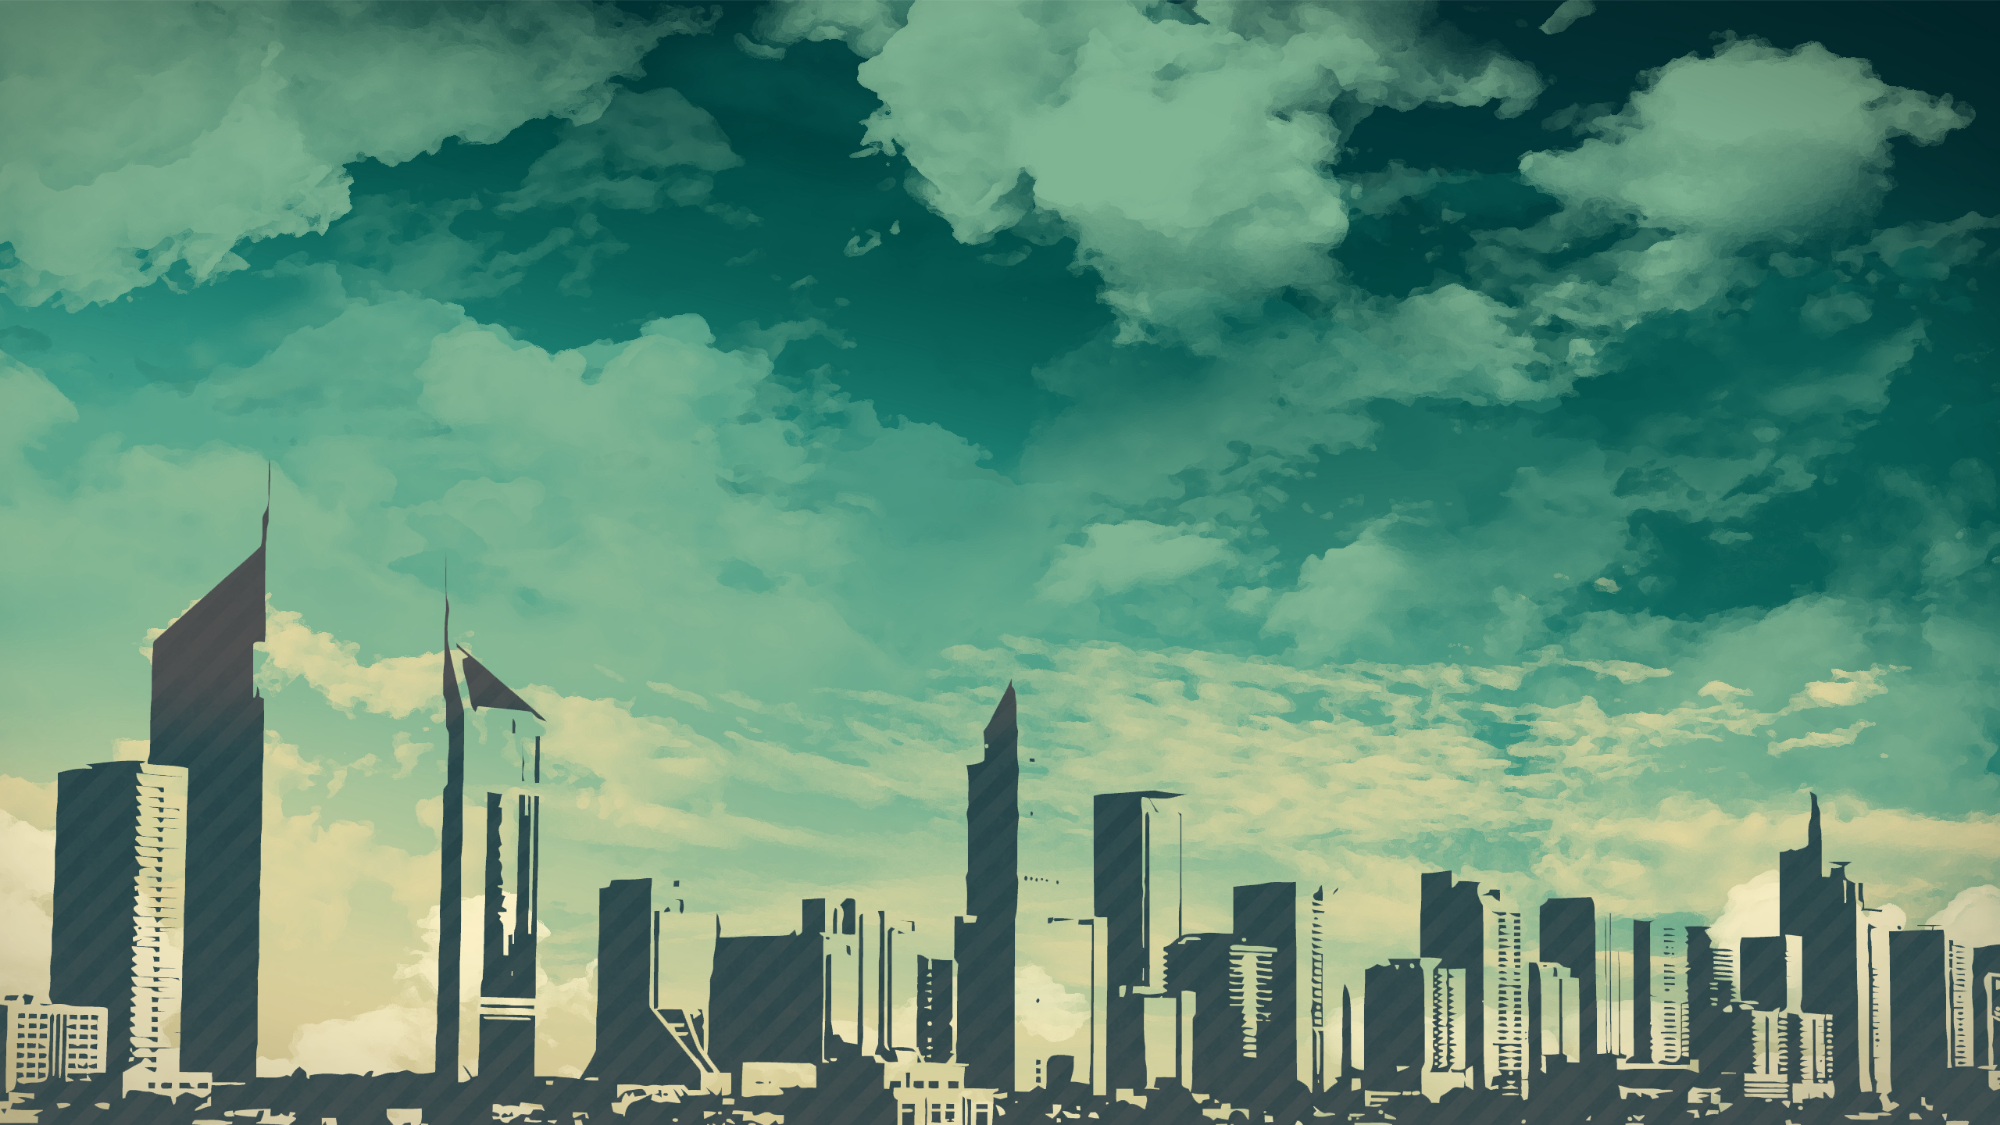 Arab Cityscape Skyscrapers Middle East Desert Cover Photo Wallpaper